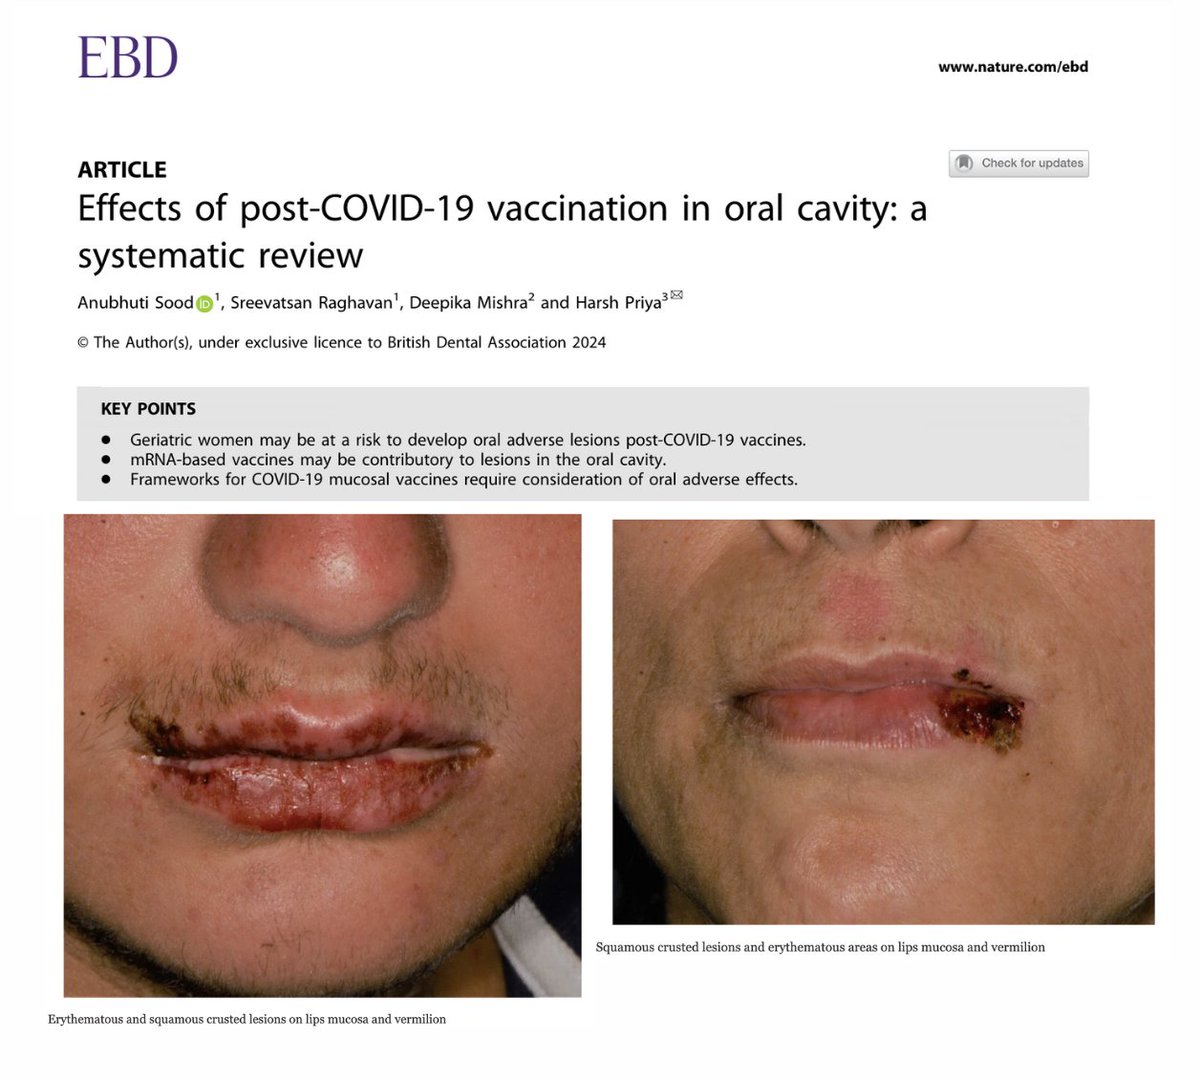 NEW STUDY - COVID-19 mRNA injections linked to various types of oral lesions a few days following inoculation, likely due to immune dysregulation. The diagnosis of the lesions included erythema multiforme minor, lichen planus, burning mouth syndrome, herpes trigeminal